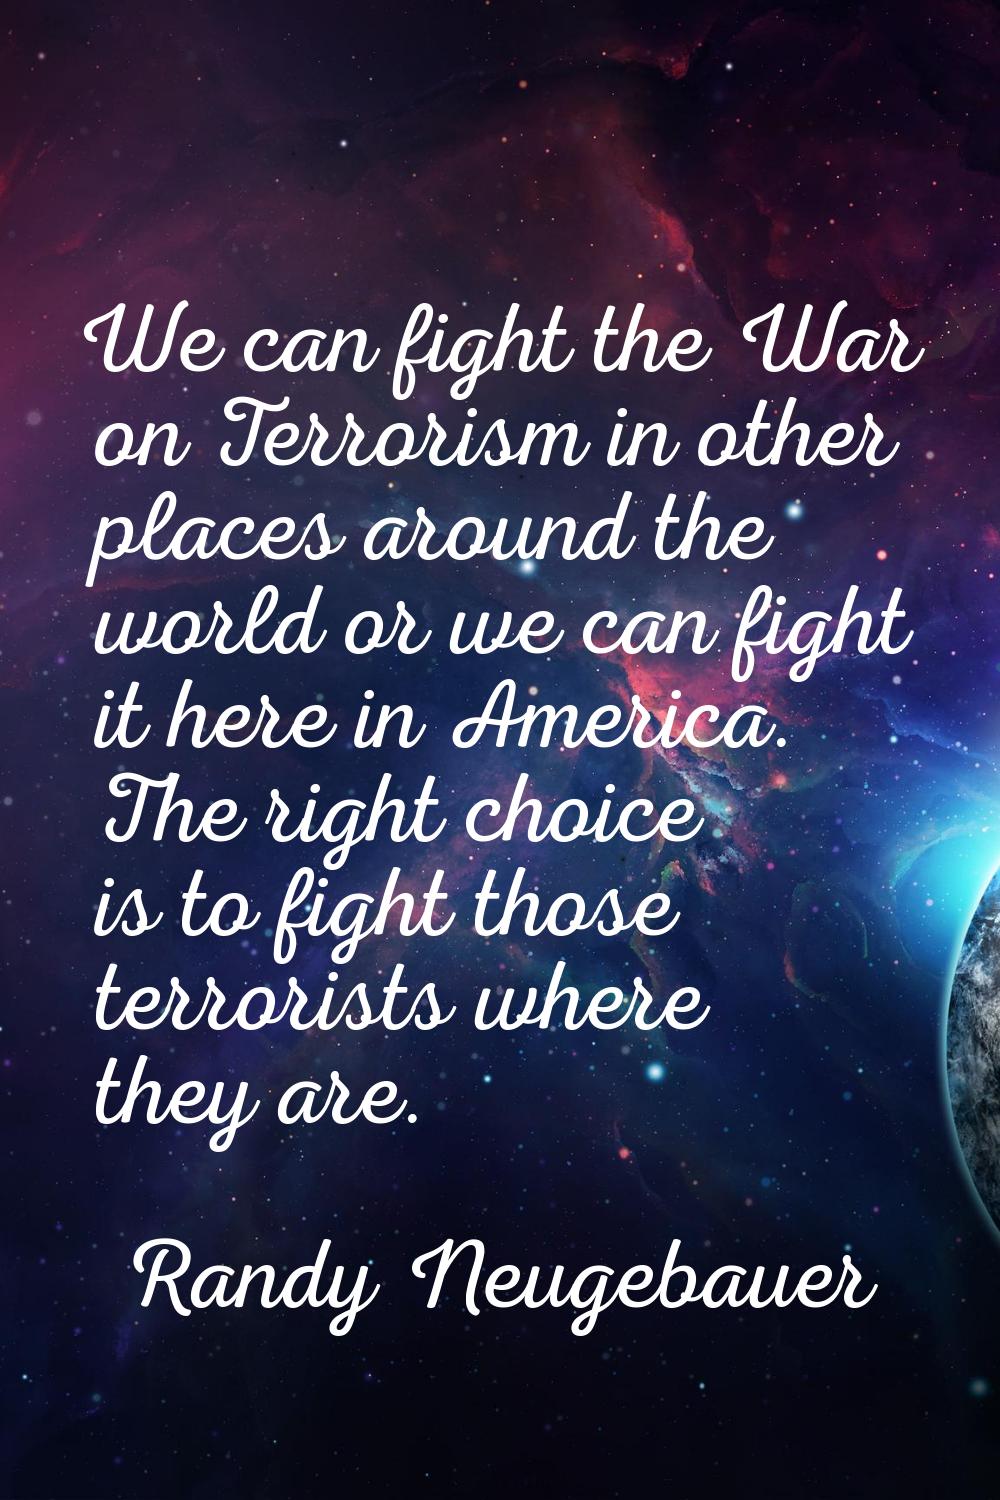 We can fight the War on Terrorism in other places around the world or we can fight it here in Ameri